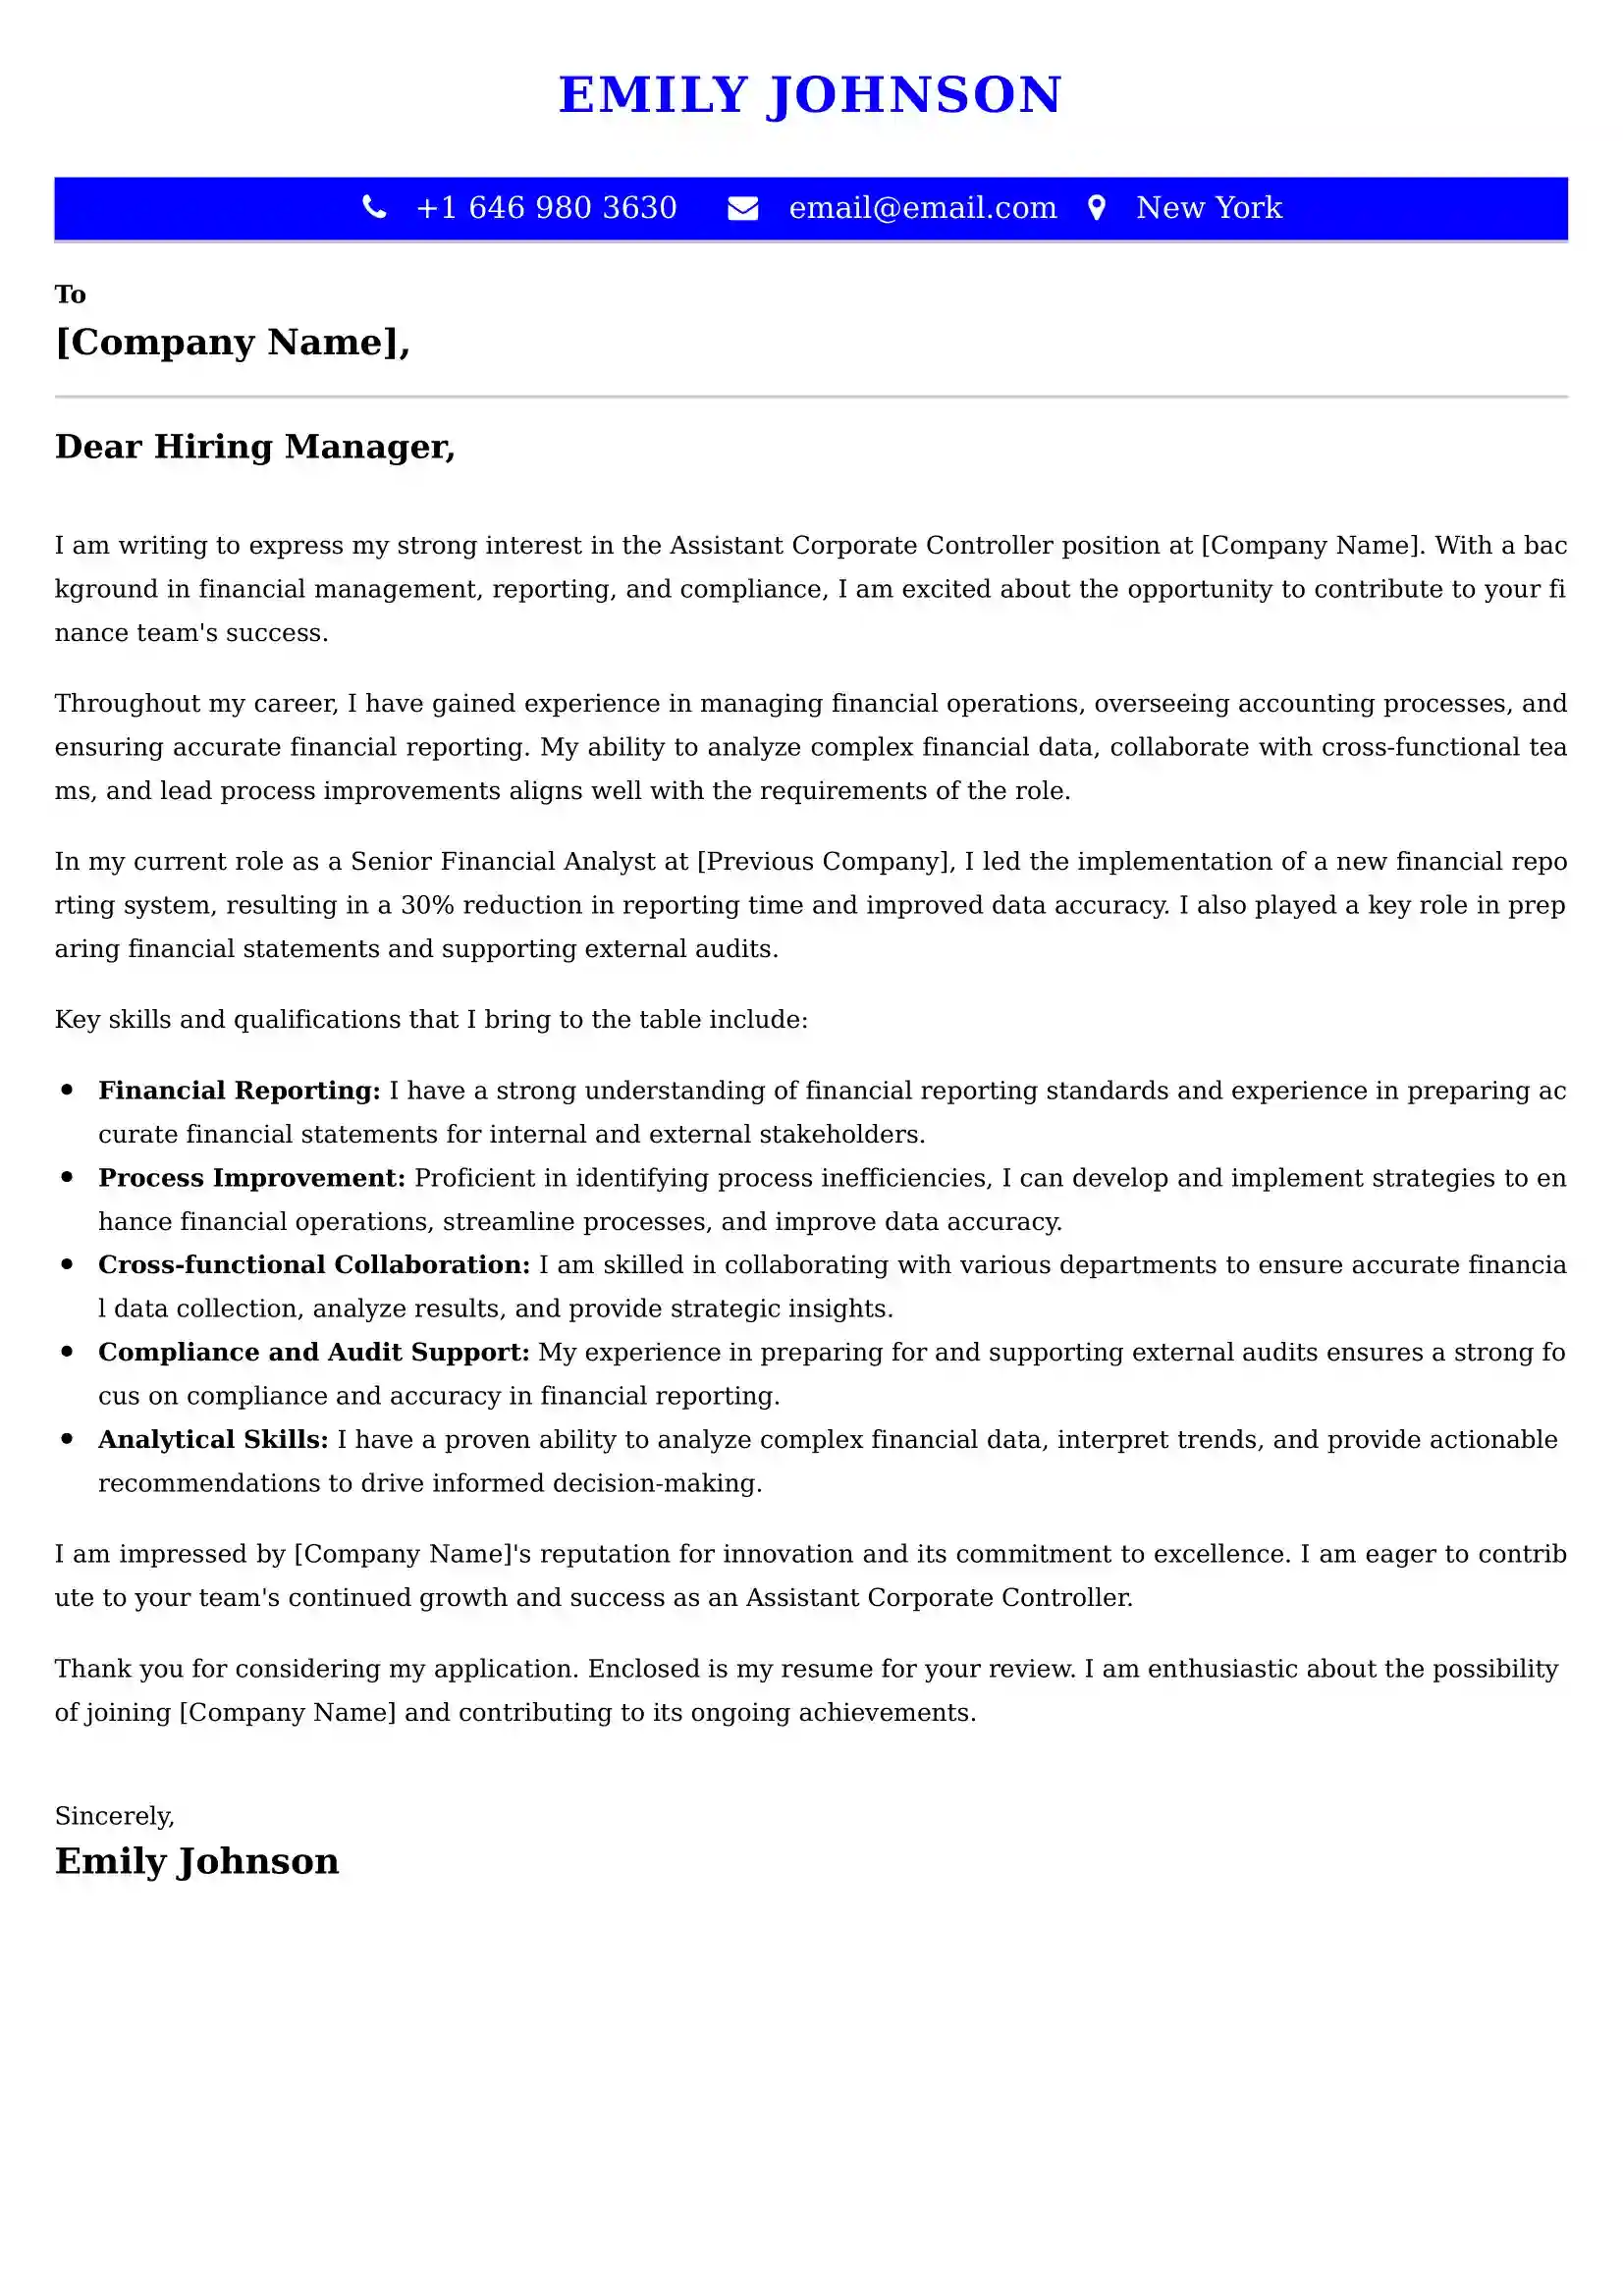 Assistant Corporate Controller Cover Letter Examples - Latest UK Format